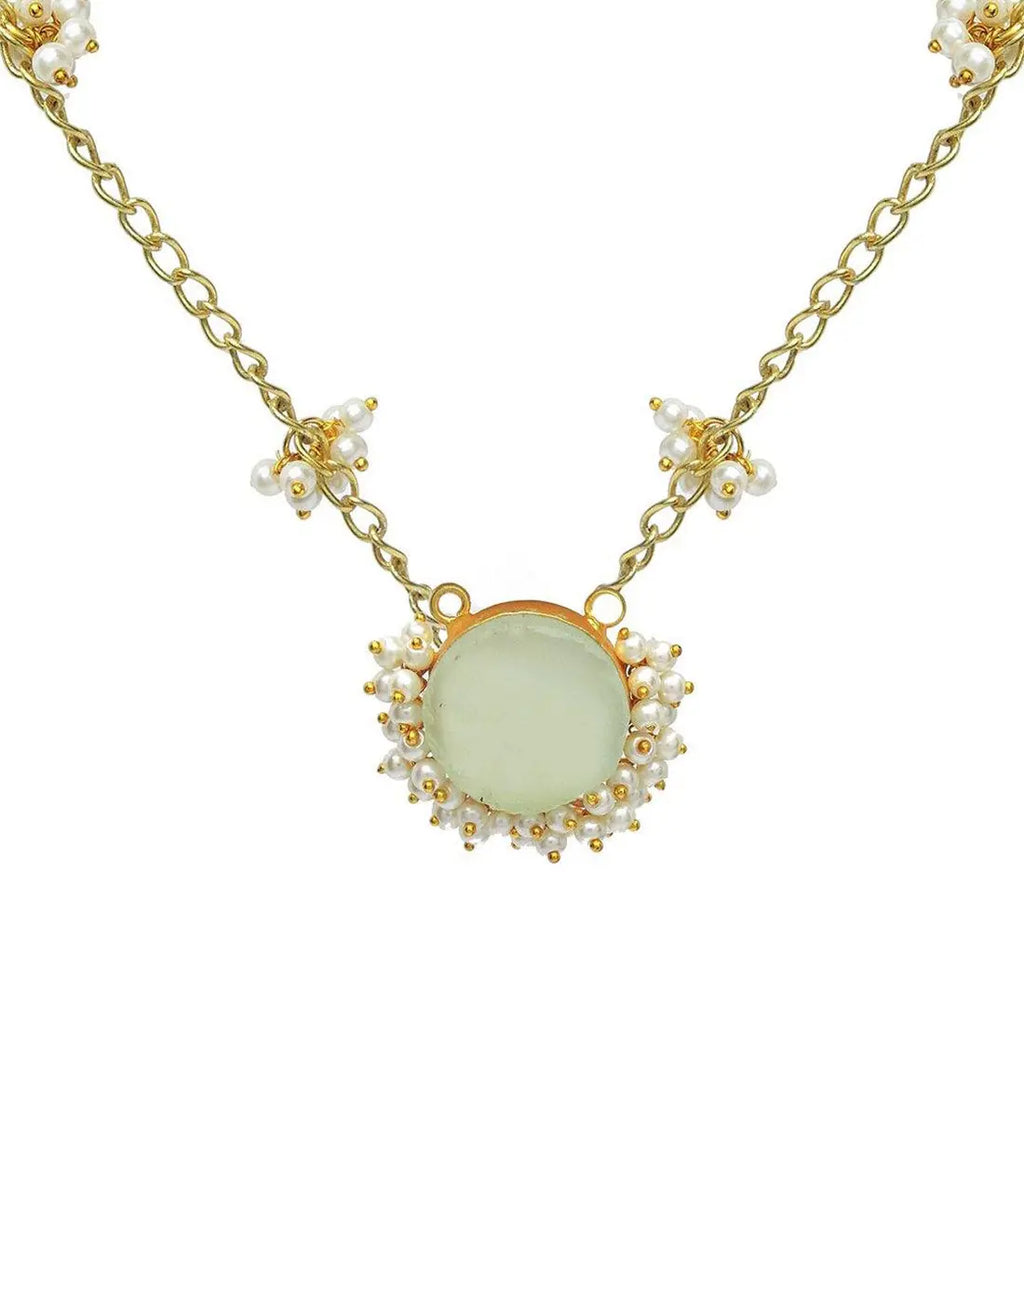 Chalcedony Tiara Necklace- Handcrafted Jewellery from Dori